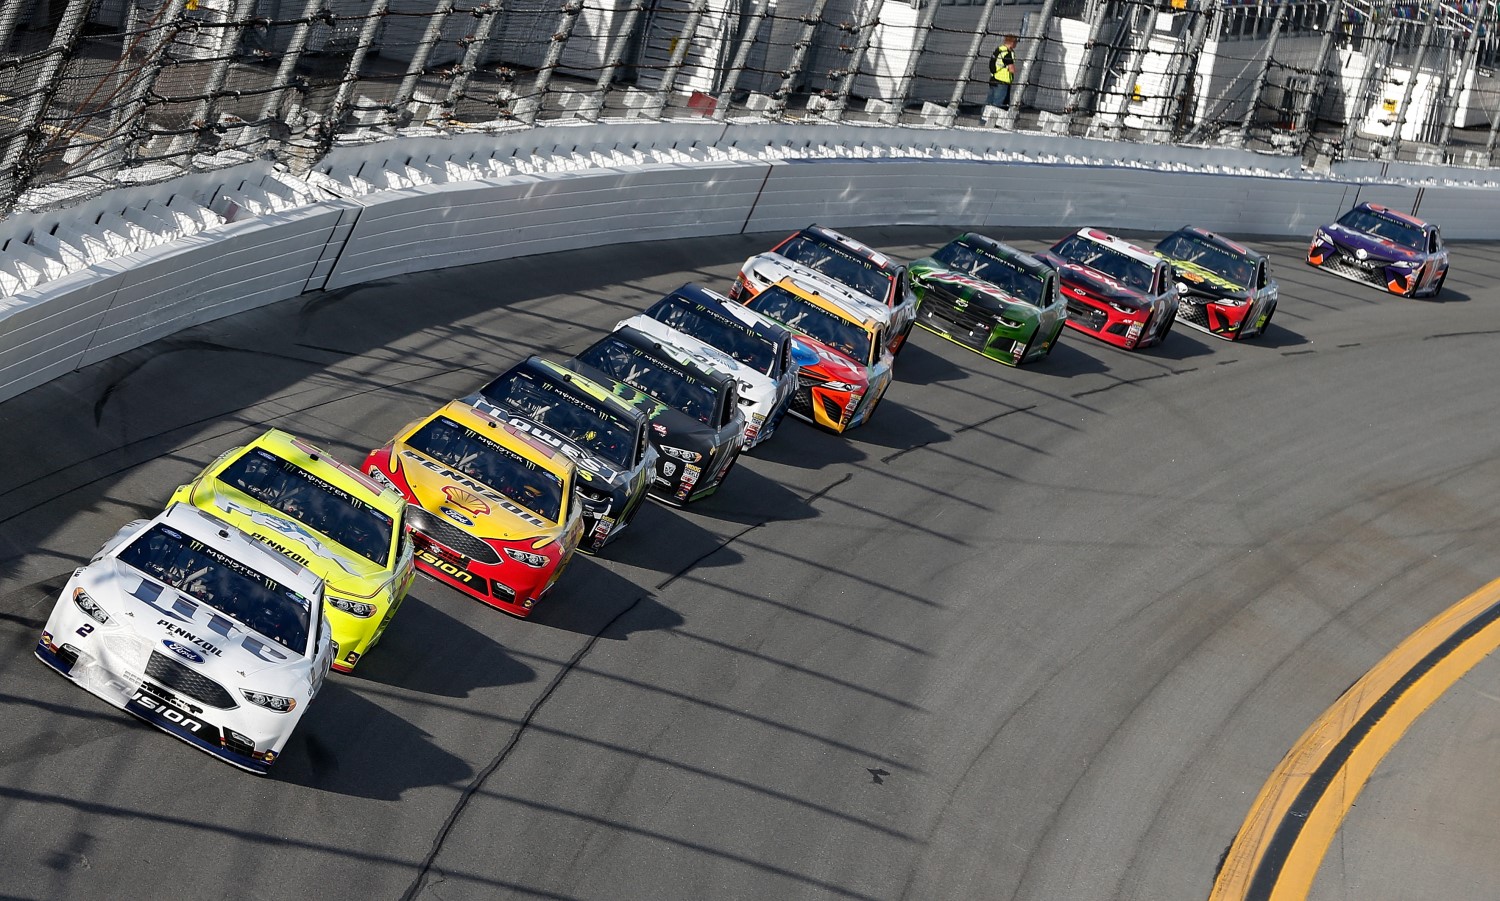 NASCAR wants to make sure drivers don't throw a race so their buddy can win $1 million